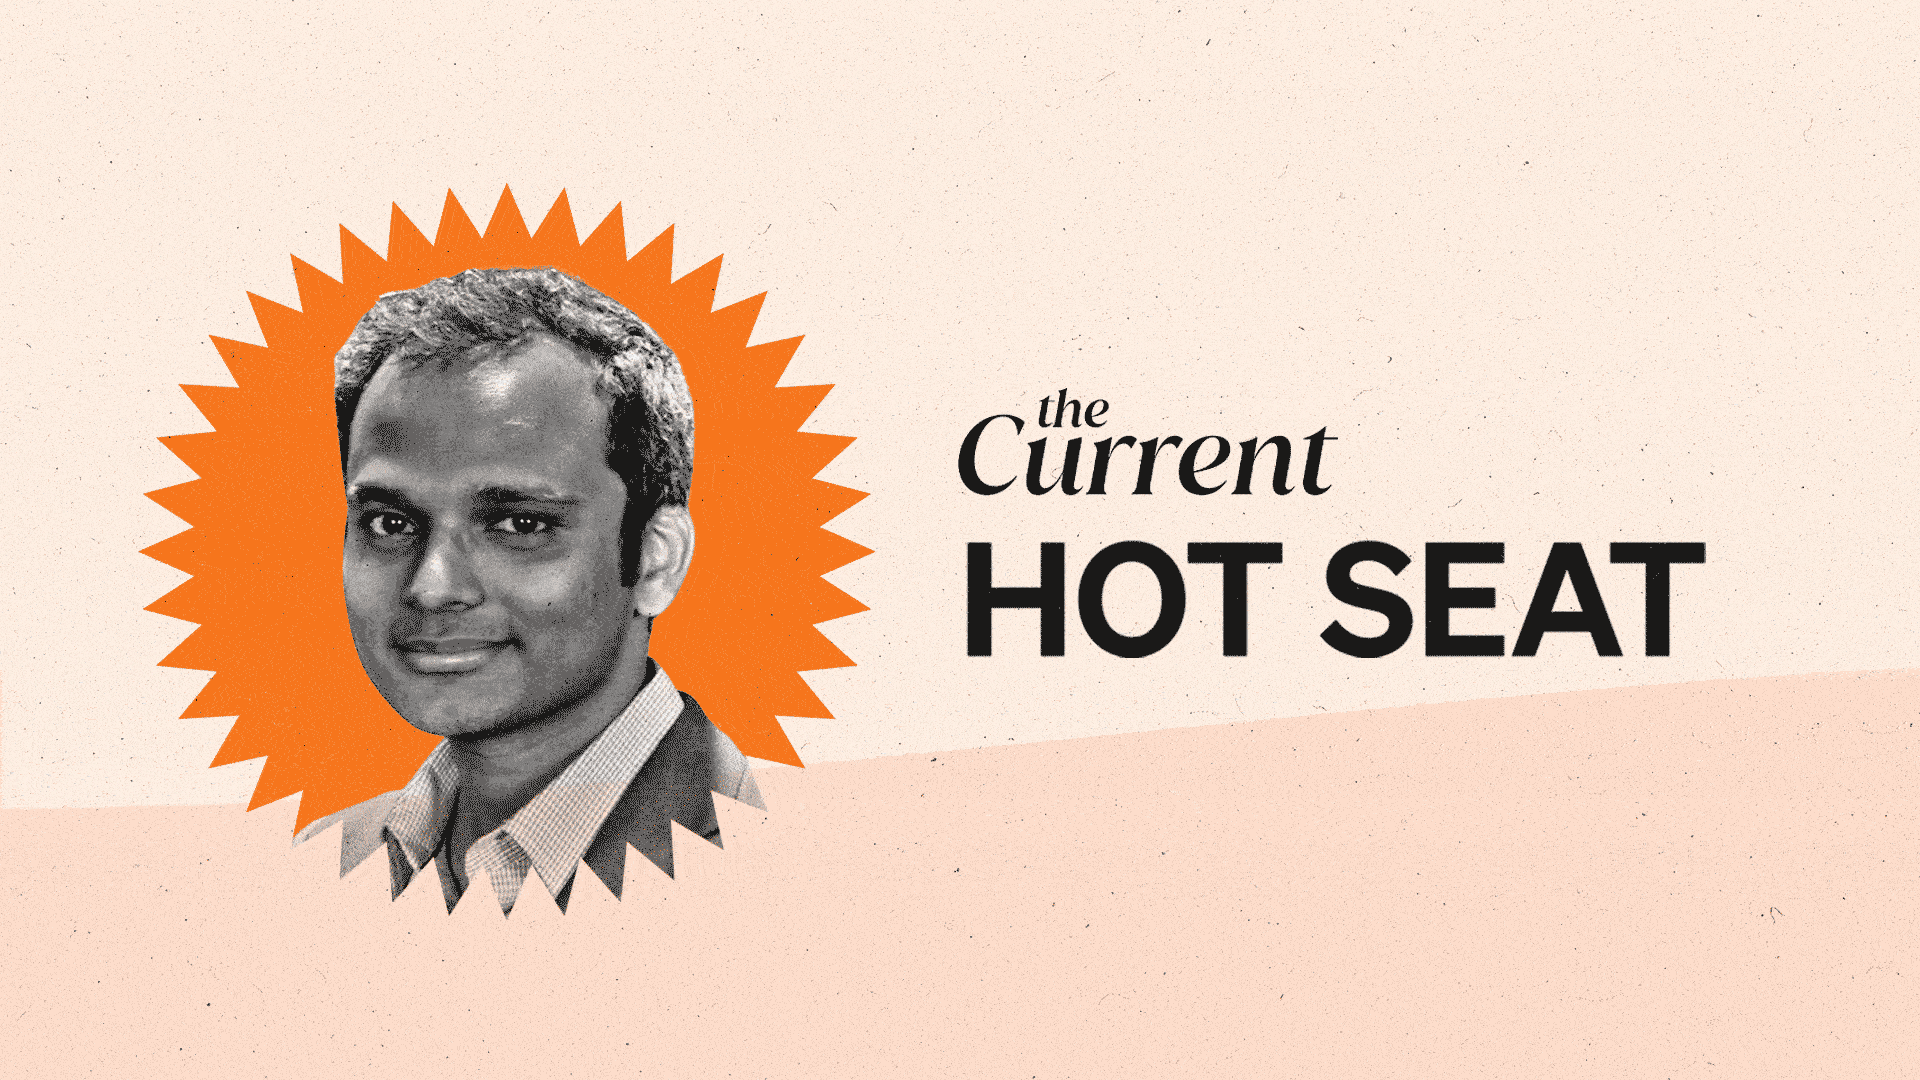 The Current's Hot Seat with PepsiCo's Shyam Venugopal